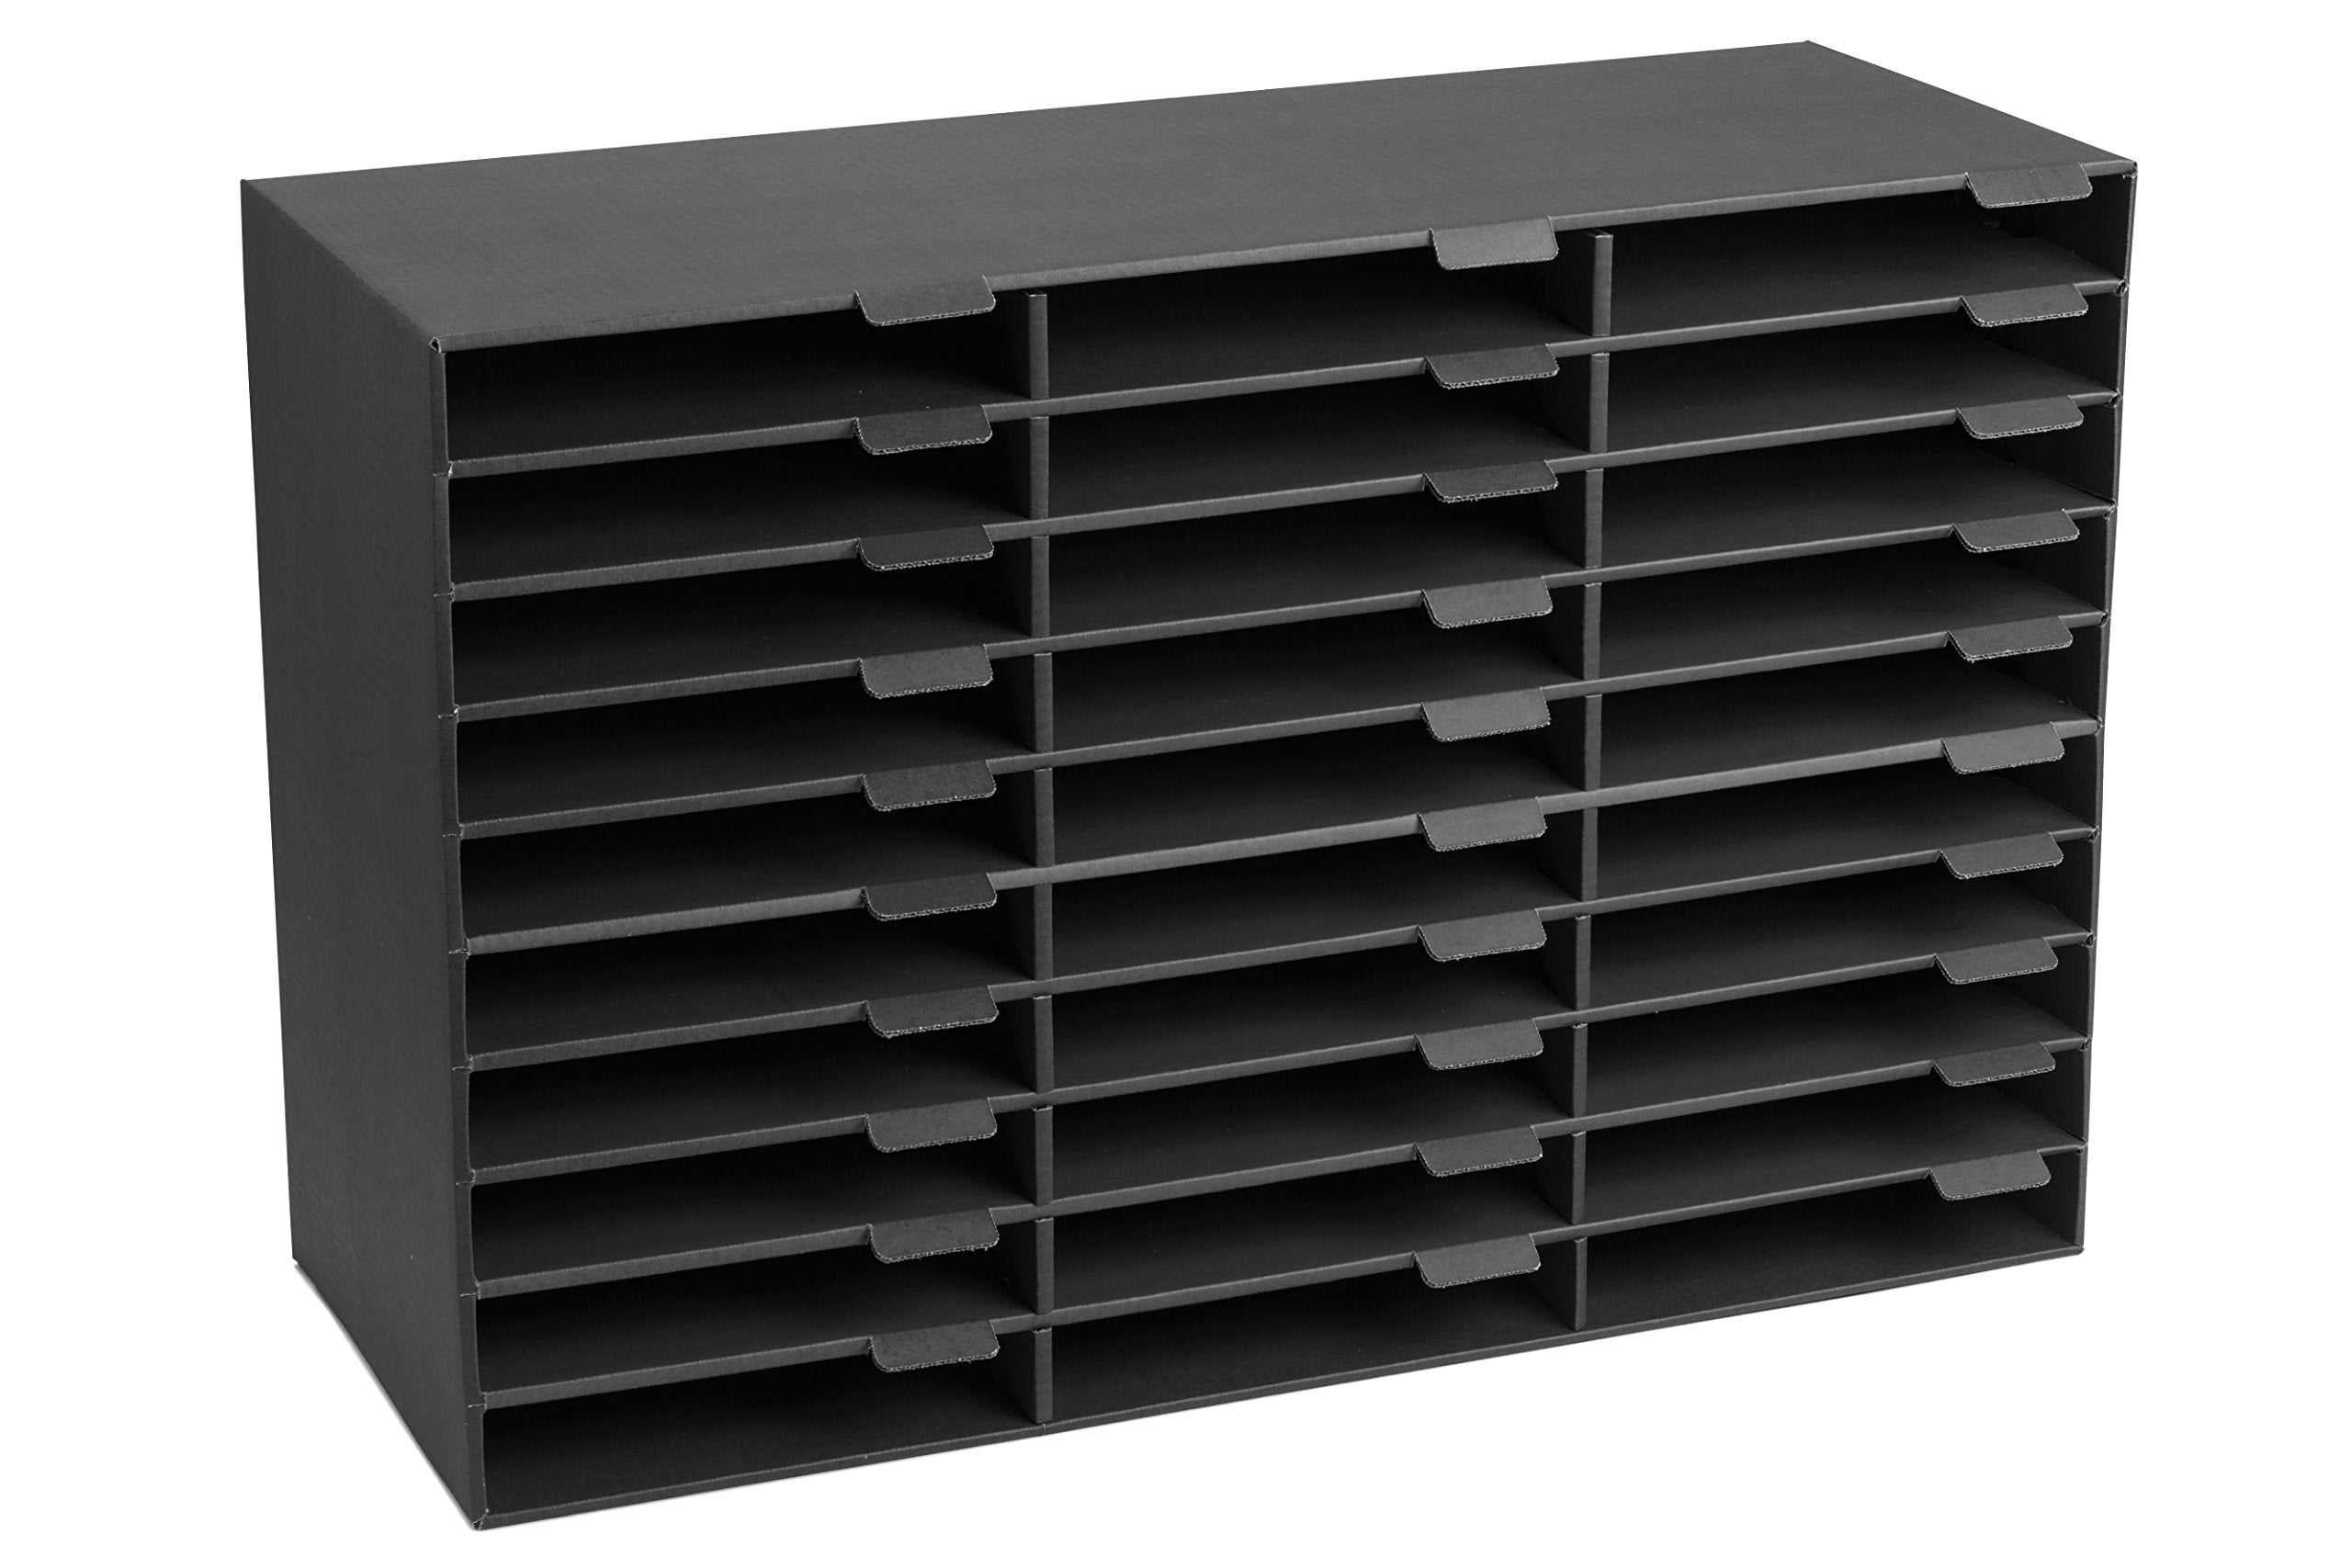 AdirOffice Cardboard Paper Organizer - Classroom Mailbox , Literature Organizers , Office Sorter Mailboxes , Construction papers Storage with Slots , Compartment Shelf Holder (30 Slot, Black)  - Acceptable